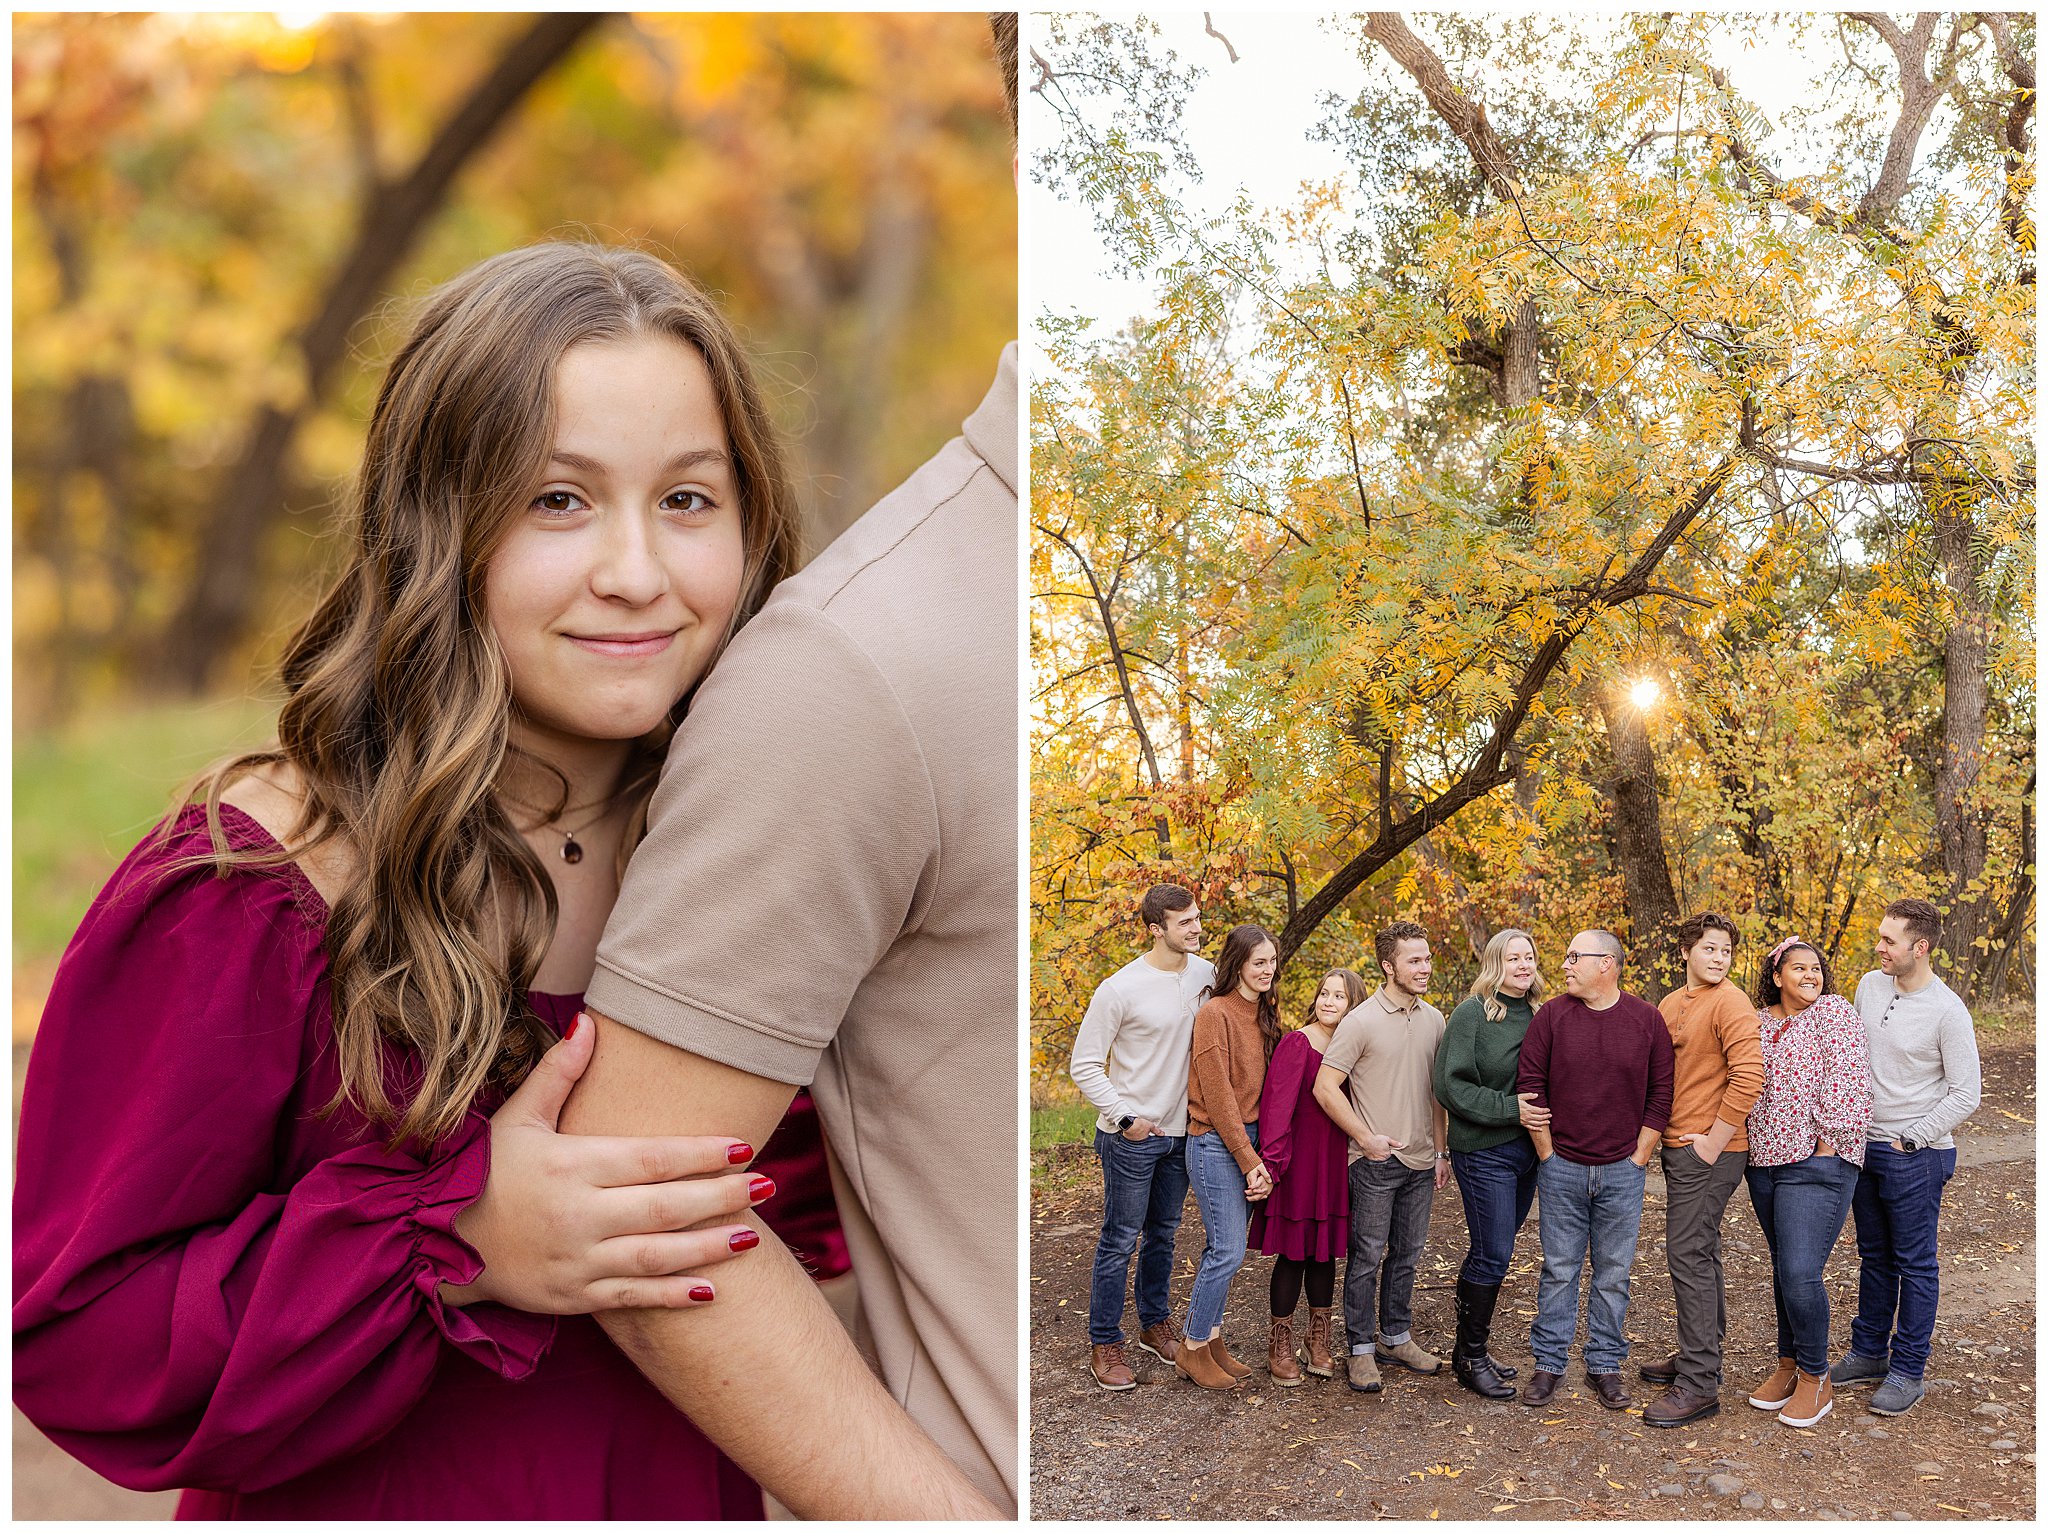 Upper Bidwell Park Large Extended Family Session Chico CA Fall November Grandparents Great Grandparents Siblings Cousins,